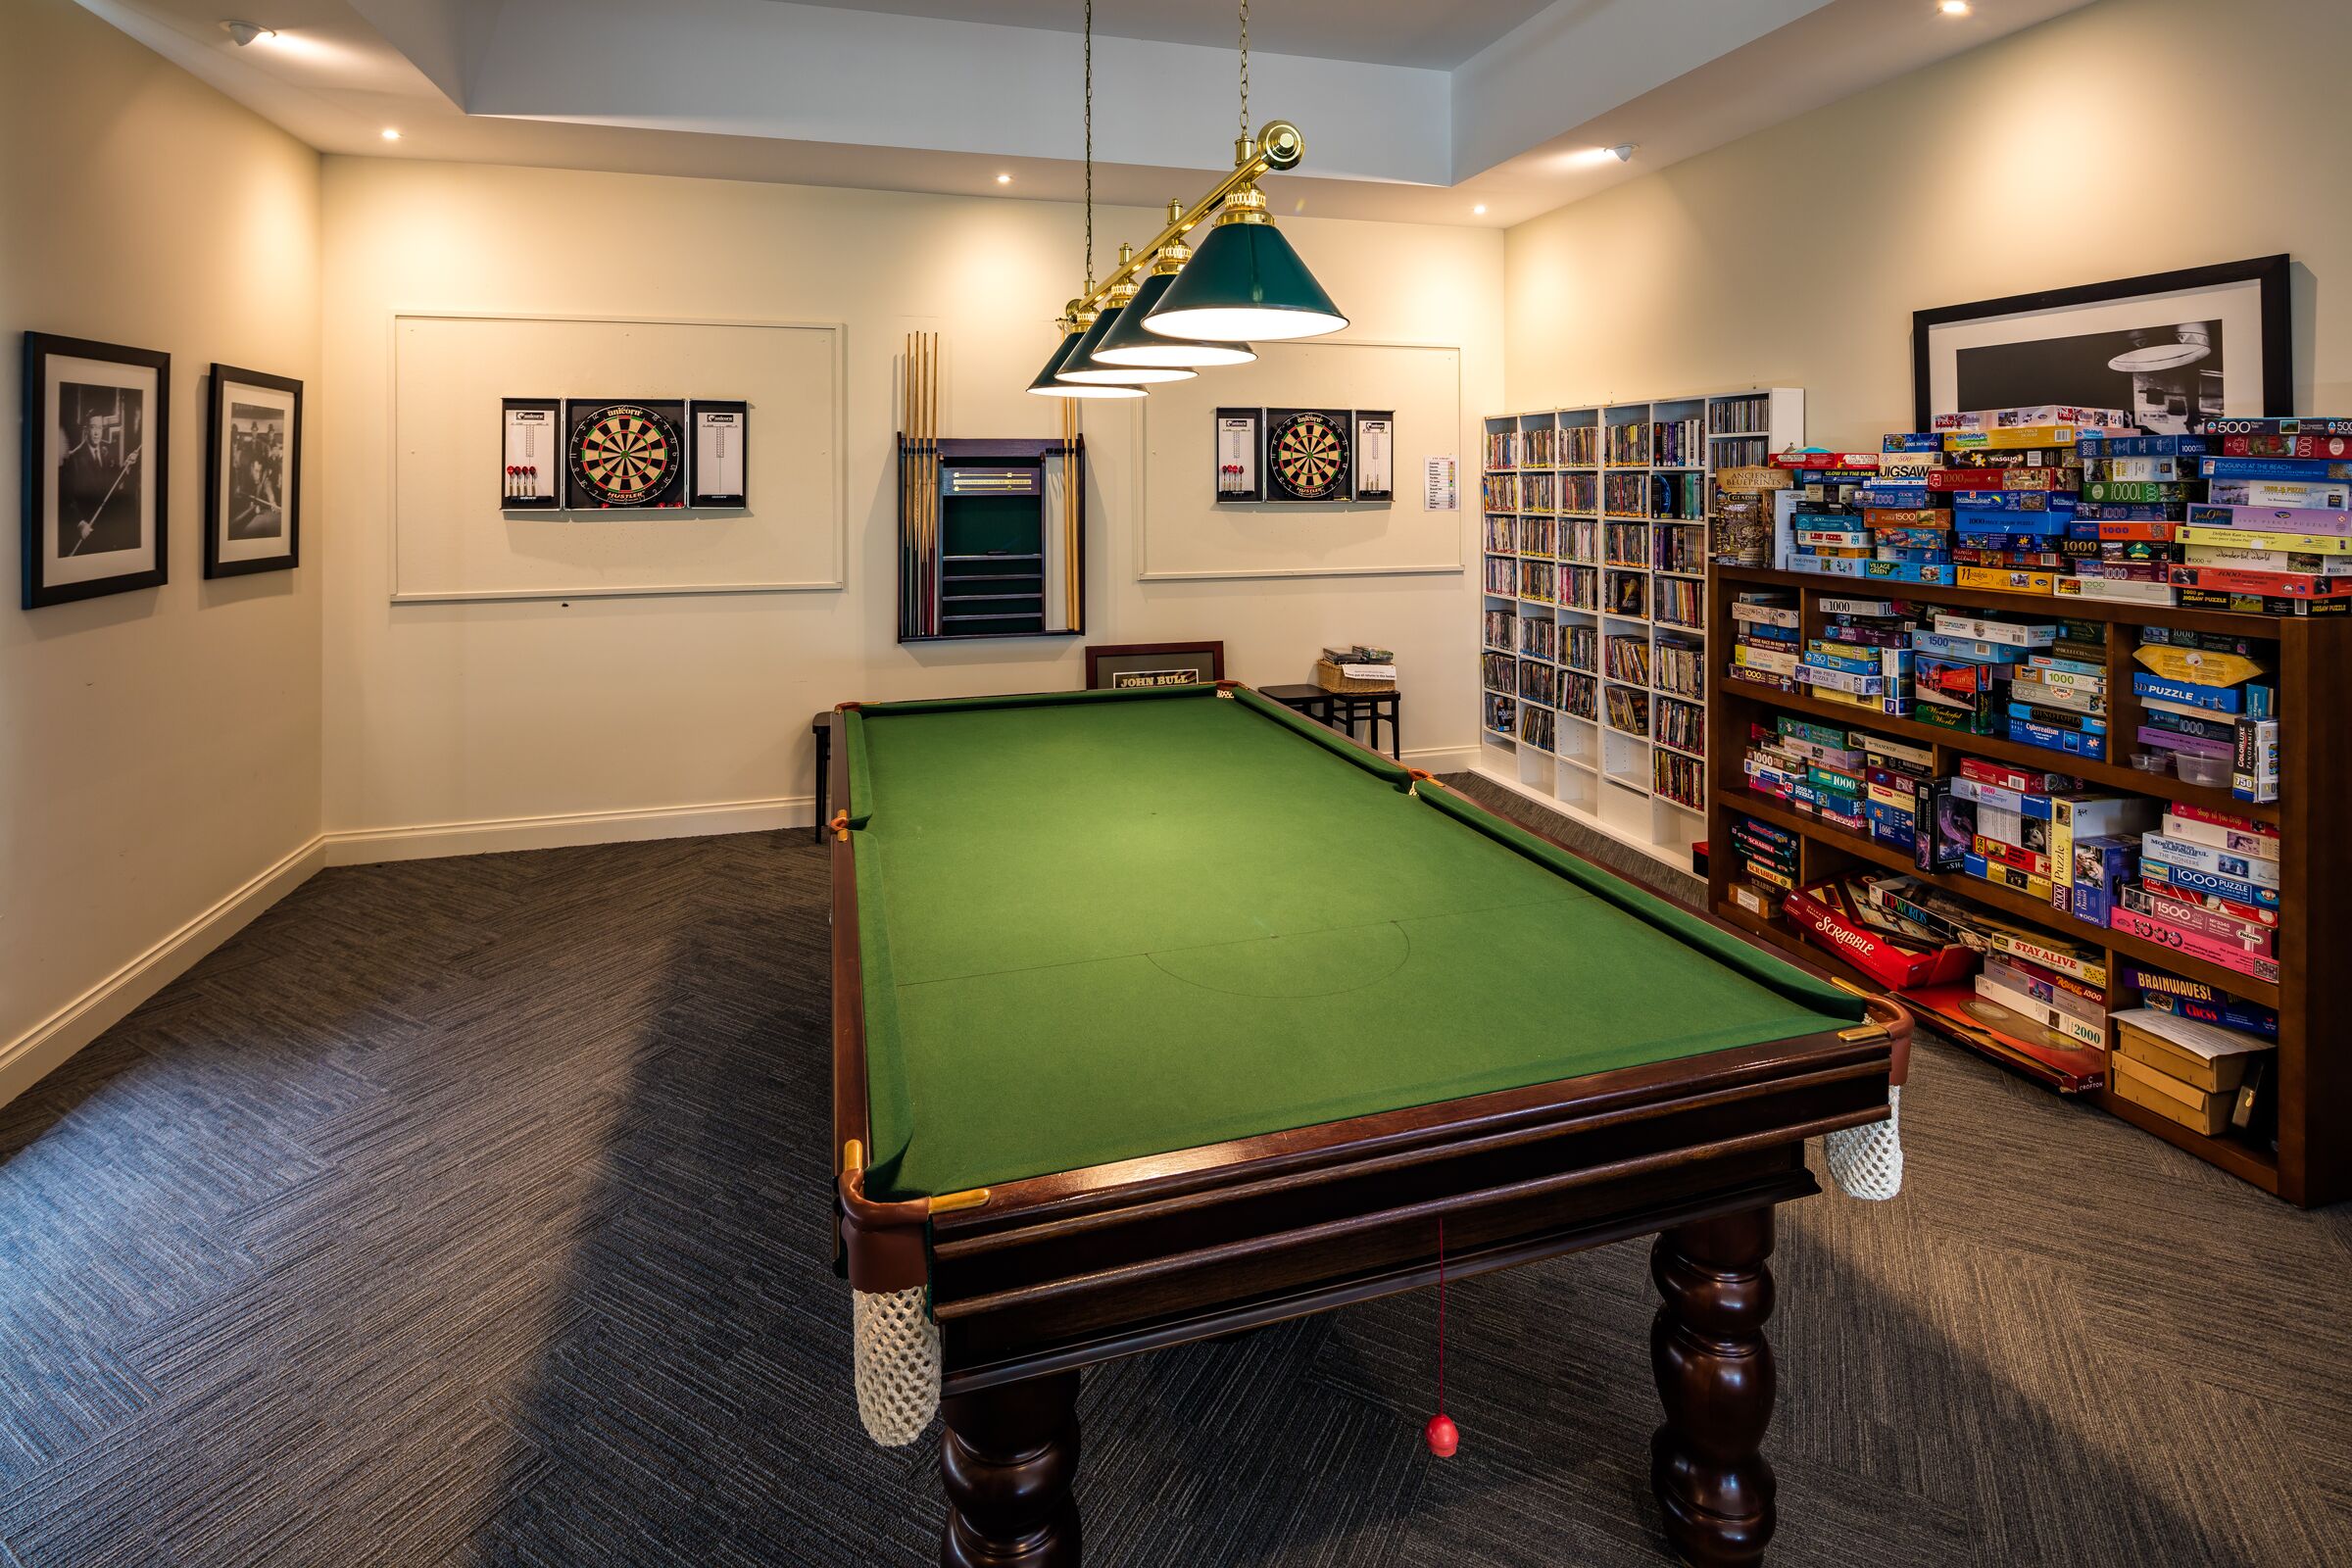 Martha's Point room with pool table, bookshelves, darts board and lots of board games